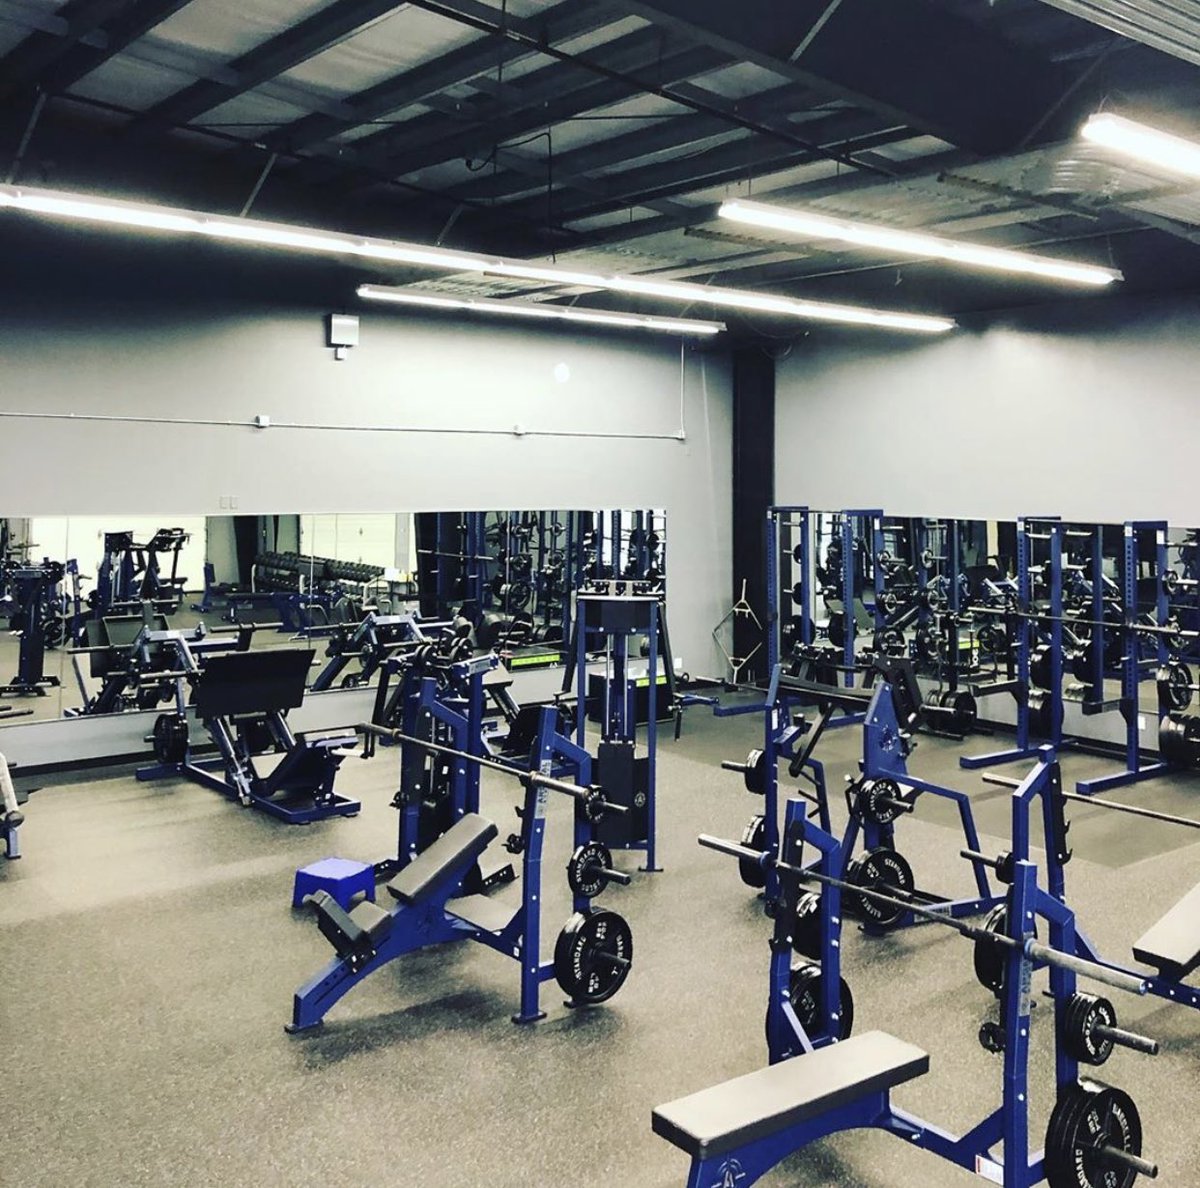 We’re ready.
-
Ft Reps Gym Fitness 
-

#arsenalstrength #gym #gyms #gymdesign #gymowner #healthclub #fitness #strengthcoach #weightlifting #weighttraining #strength #strengthtraining #strengthequipment #strengthandconditioning #athlete #athleticperformance #gymowners #bestself